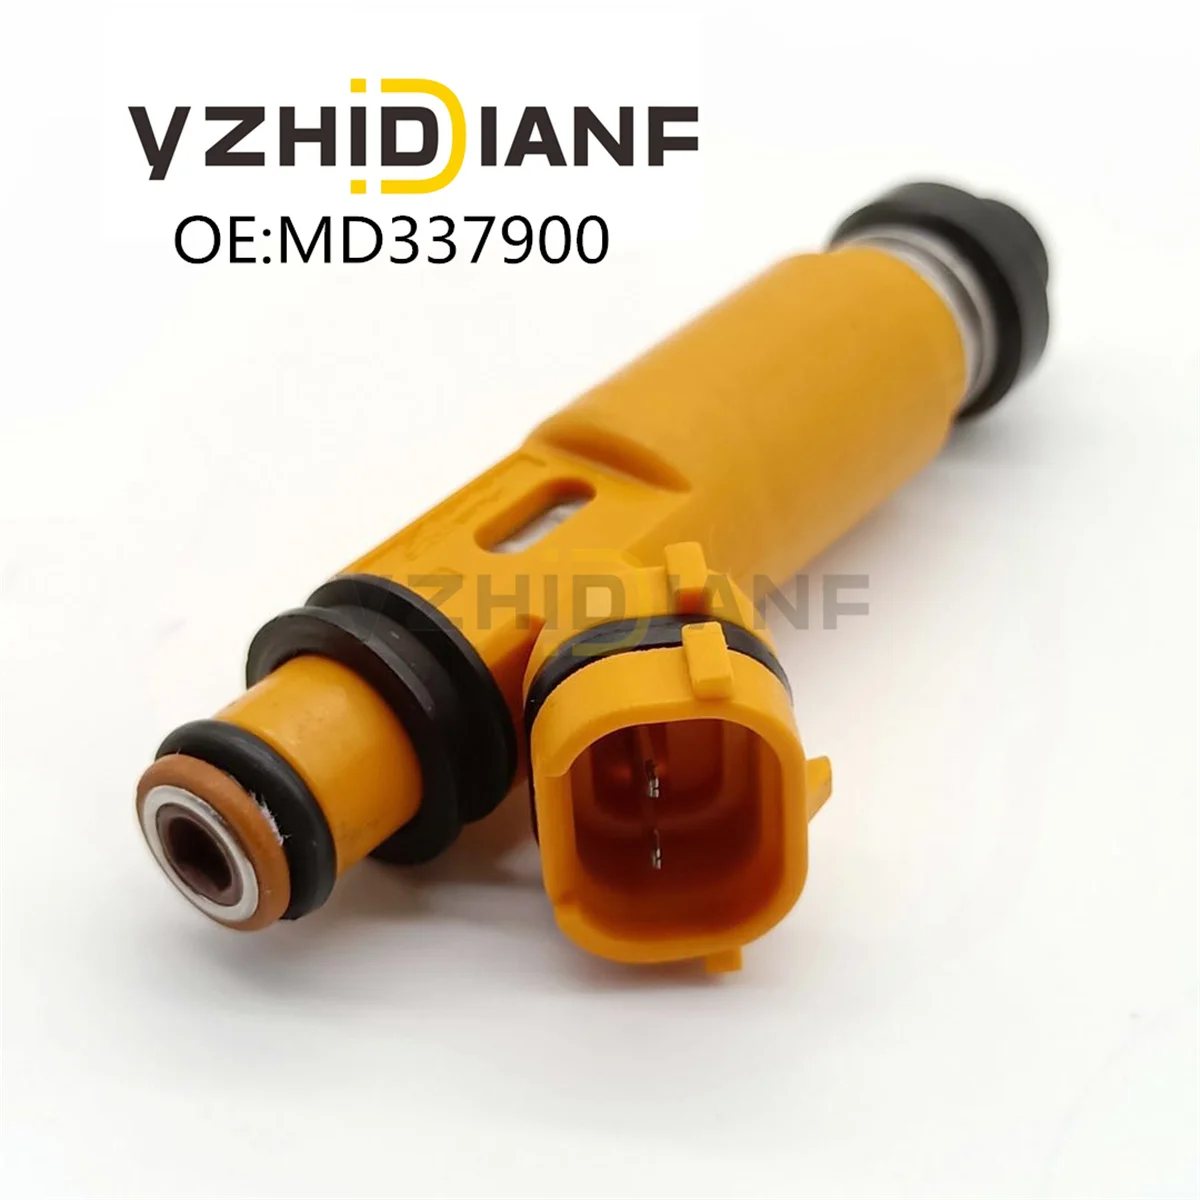 1x Fuel injector for Mitsubishi- Montero- 3.5L 6G74 1998 - 2004 OEM# MD337900 195500-3300 1955003300